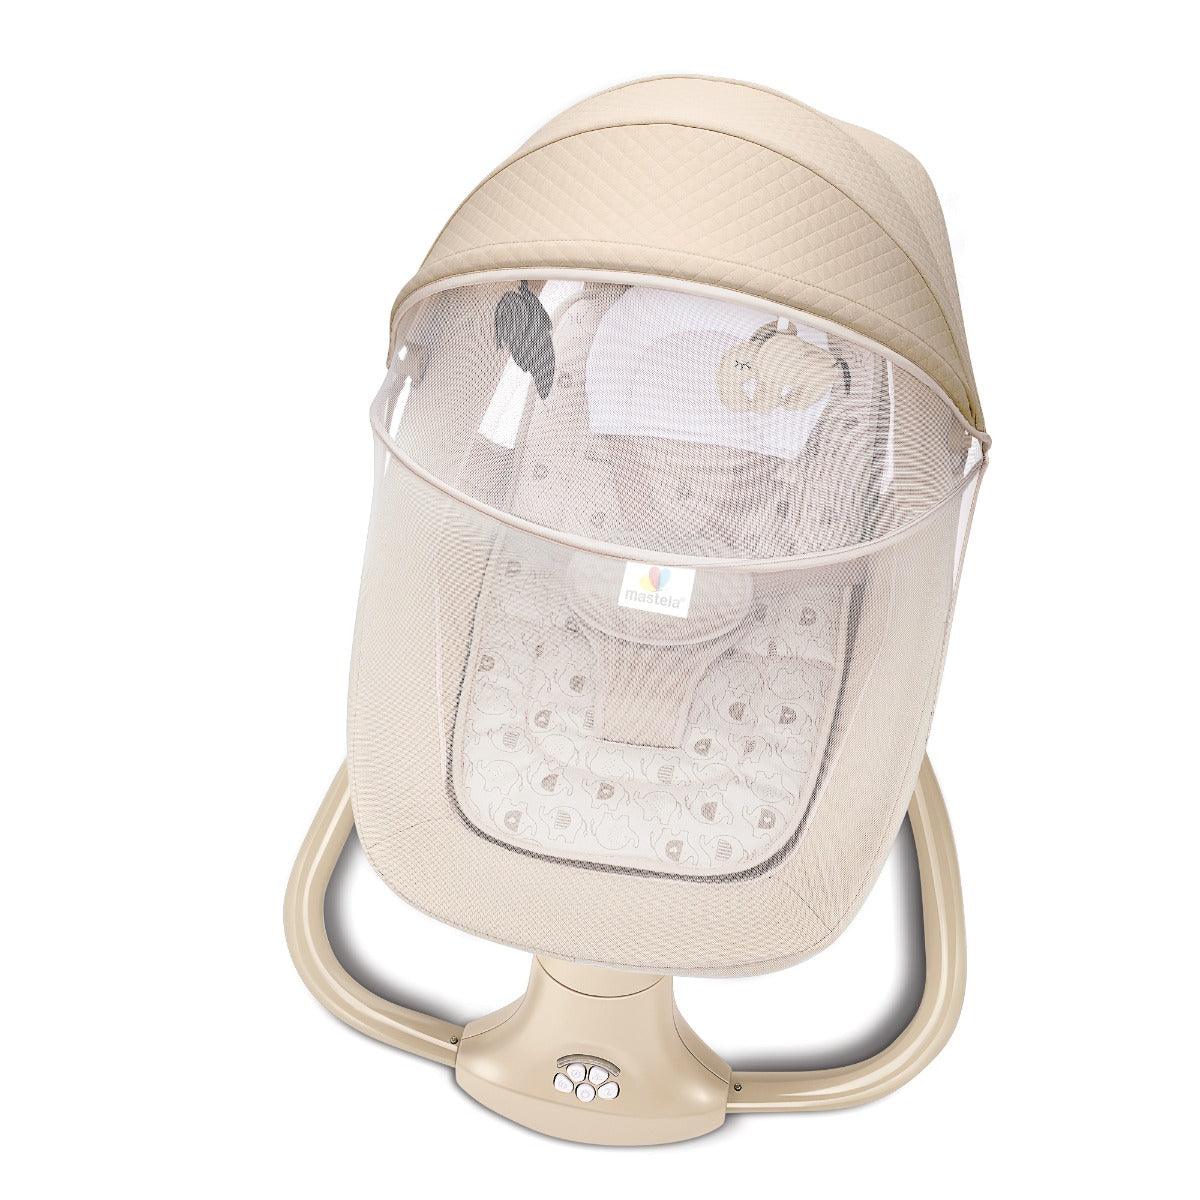 Mastela Deluxe 3 In 1 Swing Bronze - For Ages 0-3 Years